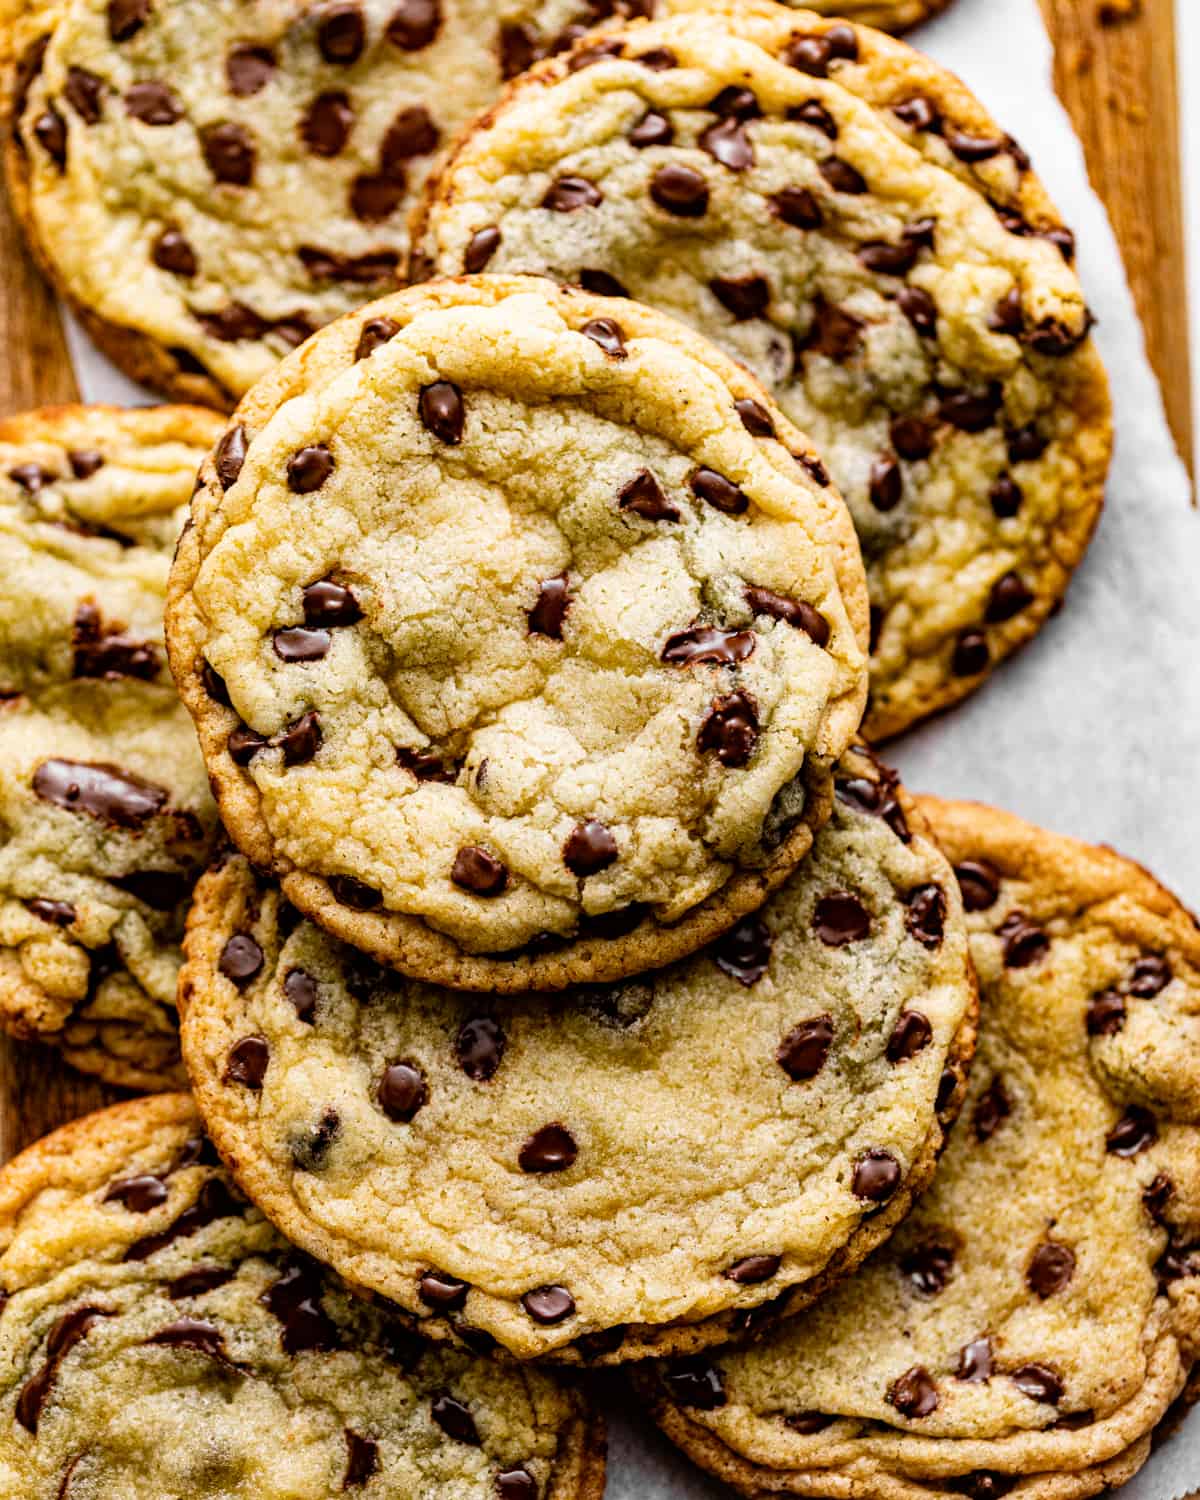 chocolate chip cookies without brown sugar on a wooden board.